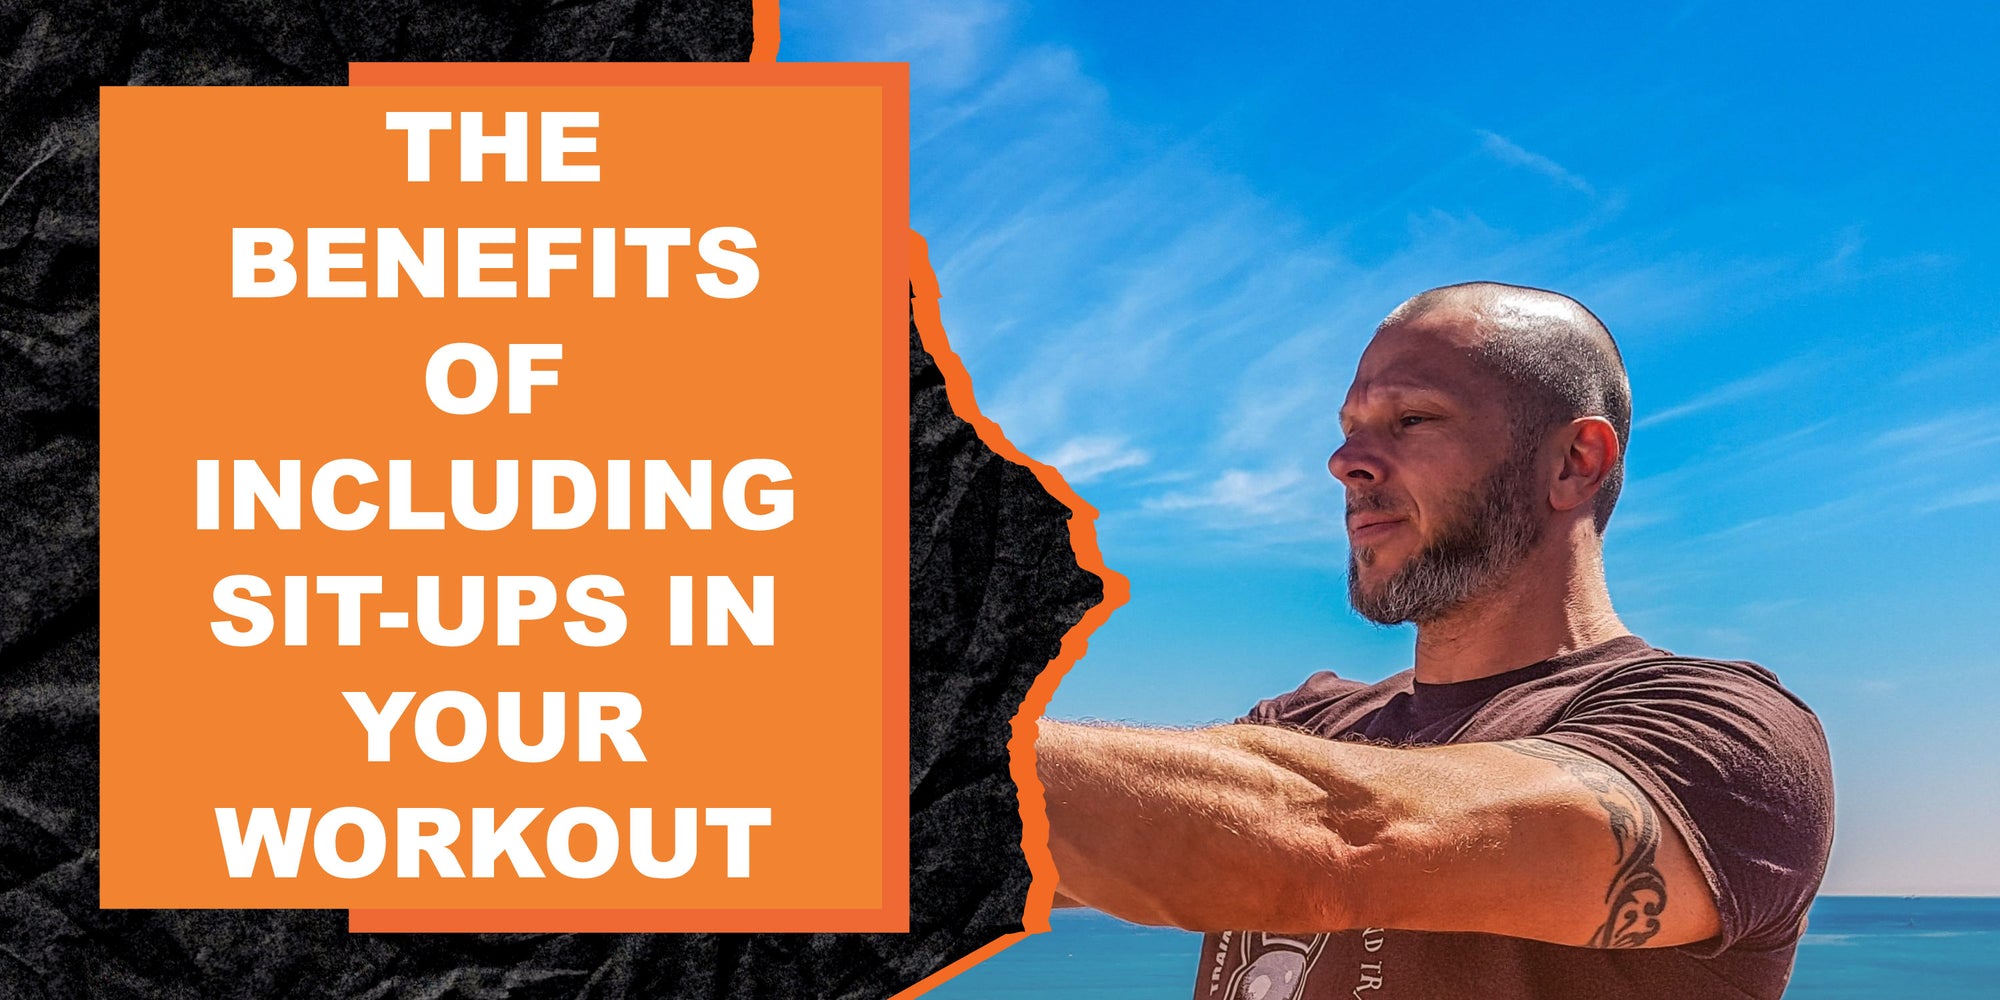 The Benefits of Including Sit-Ups in Your Workout